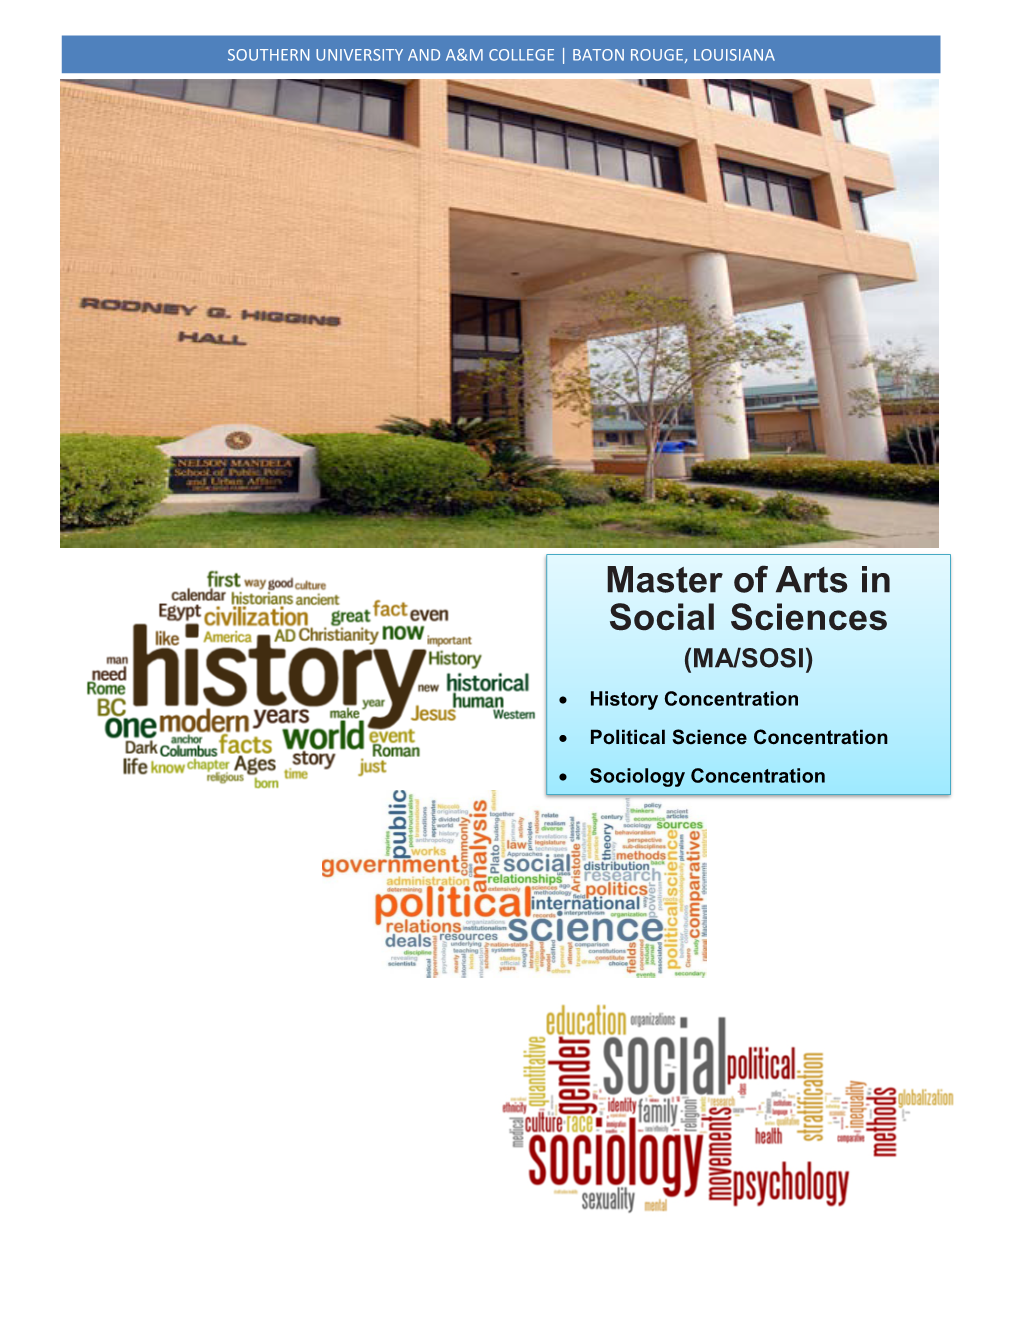 Master of Arts in Social Sciences (MA/SOSI) • History Concentration • Political Science Concentration